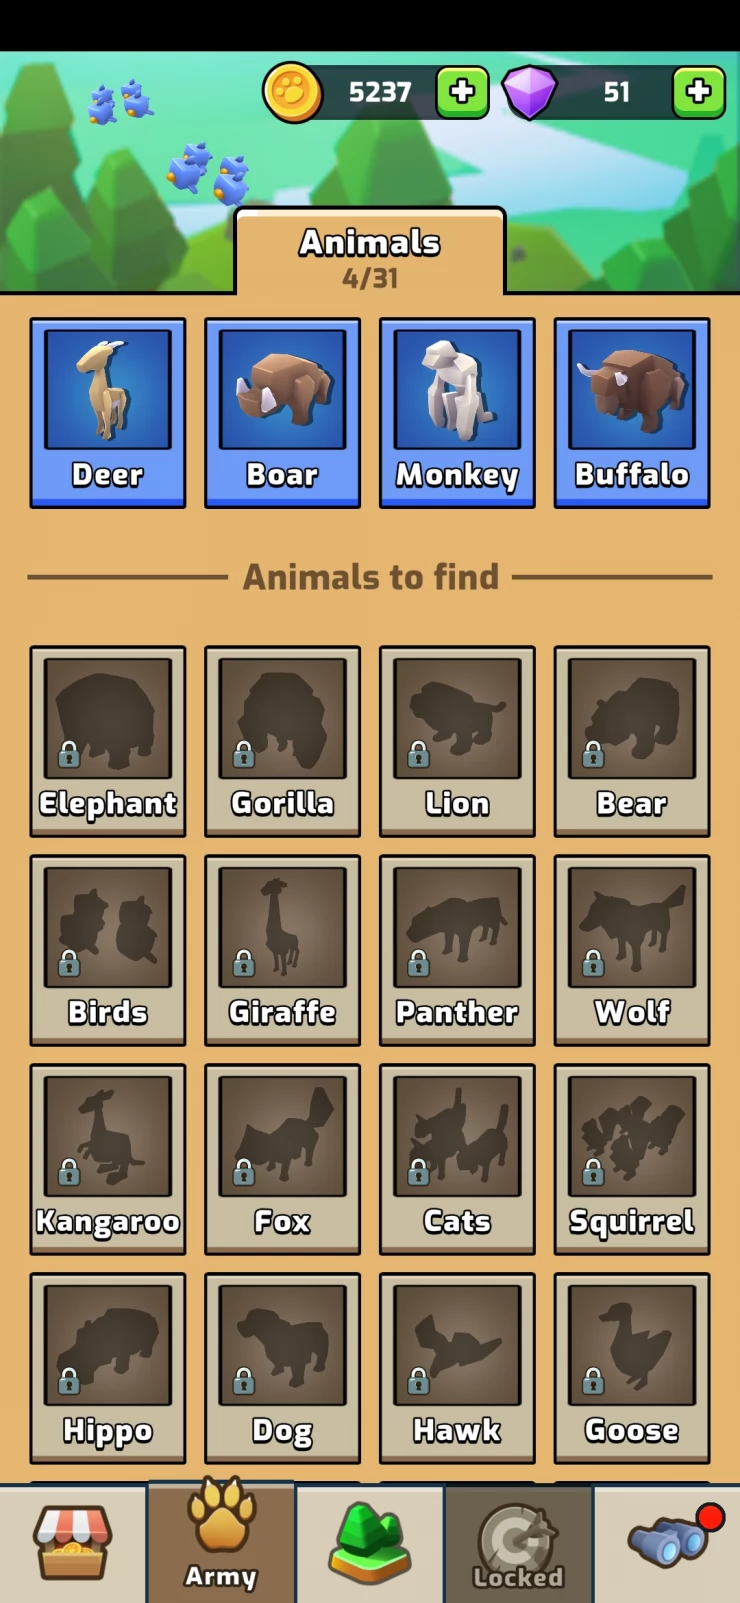 All Animals that can be unlocked in Animal Warfare